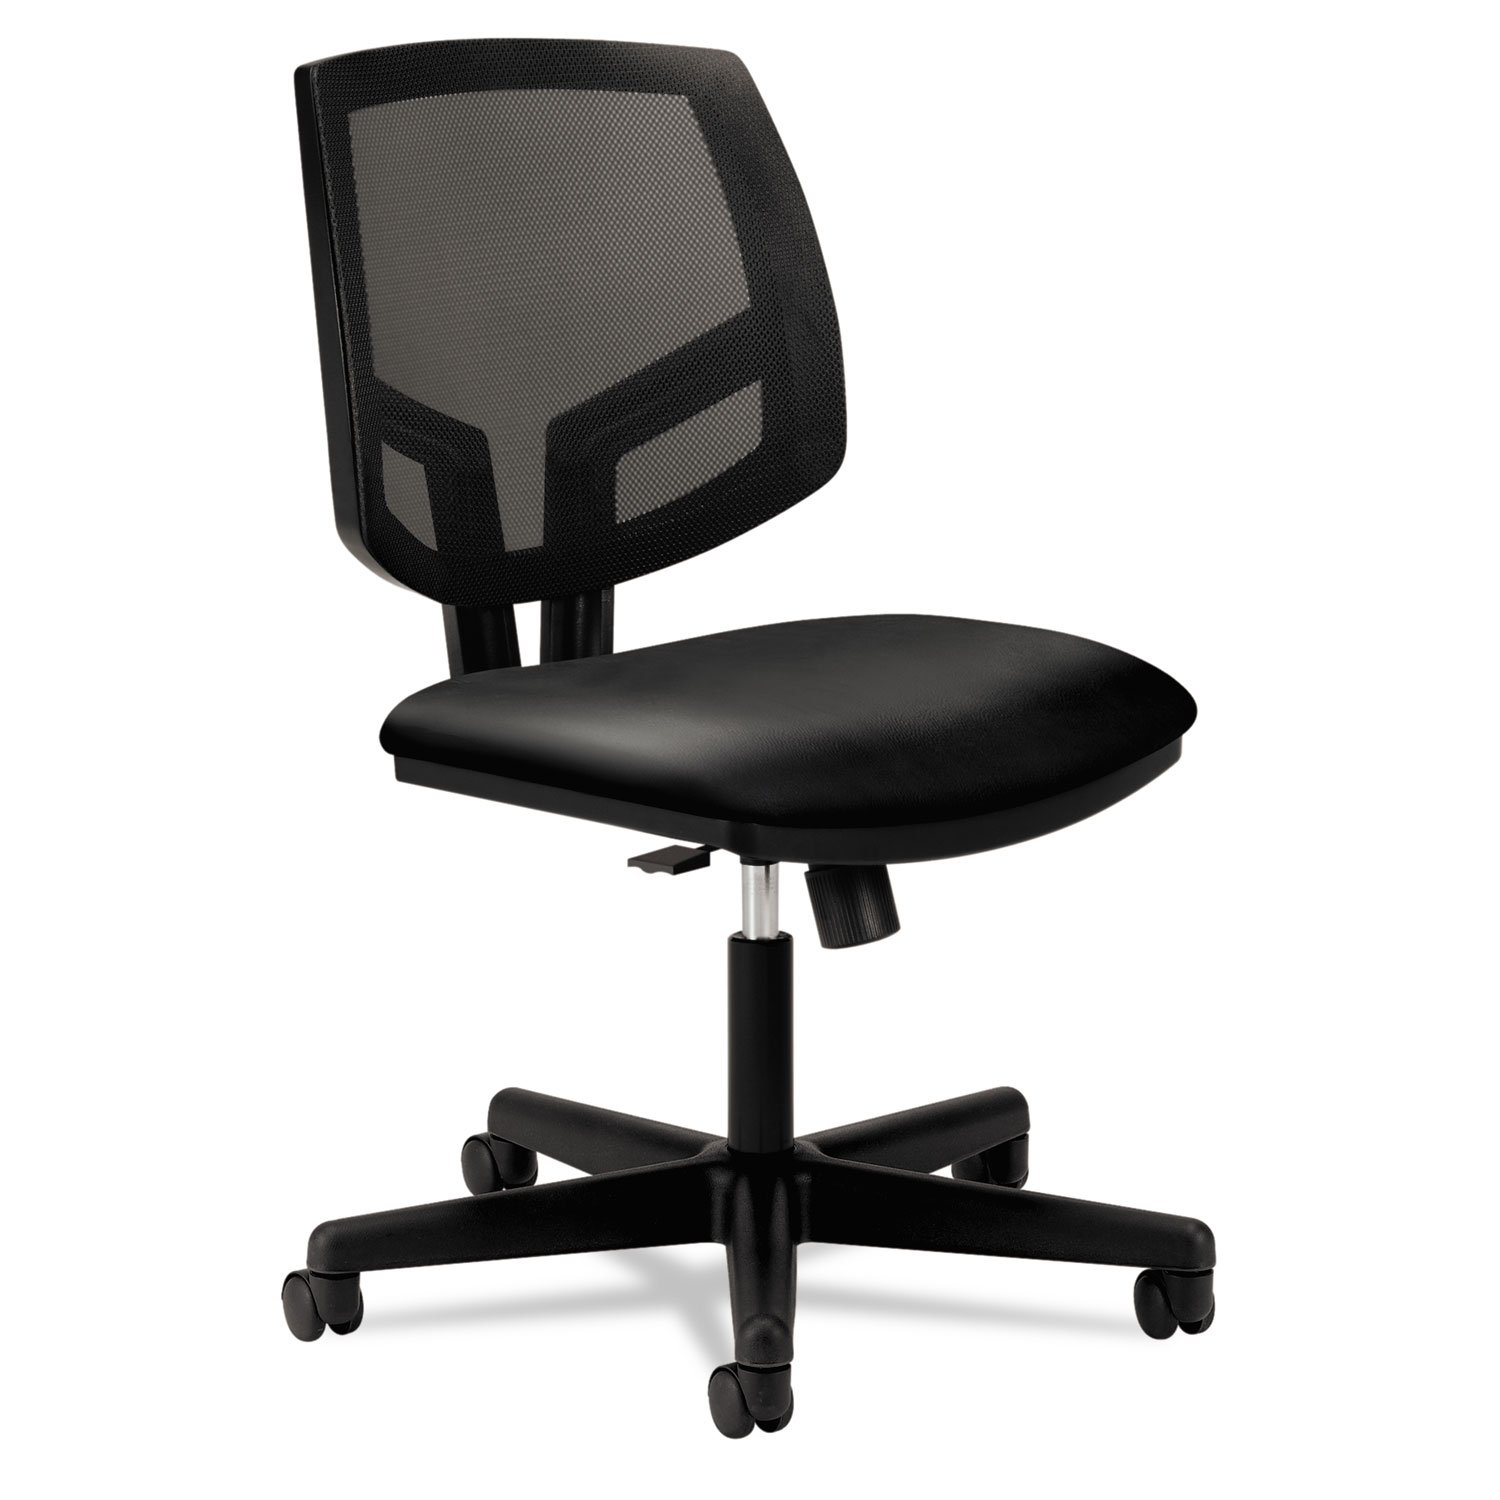  HON H5713.SB11.T Volt Series Mesh Back Leather Task Chair with Synchro-Tilt, Supports up to 250 lbs., Black Seat/Black Back, Black Base (HON5713SB11T) 